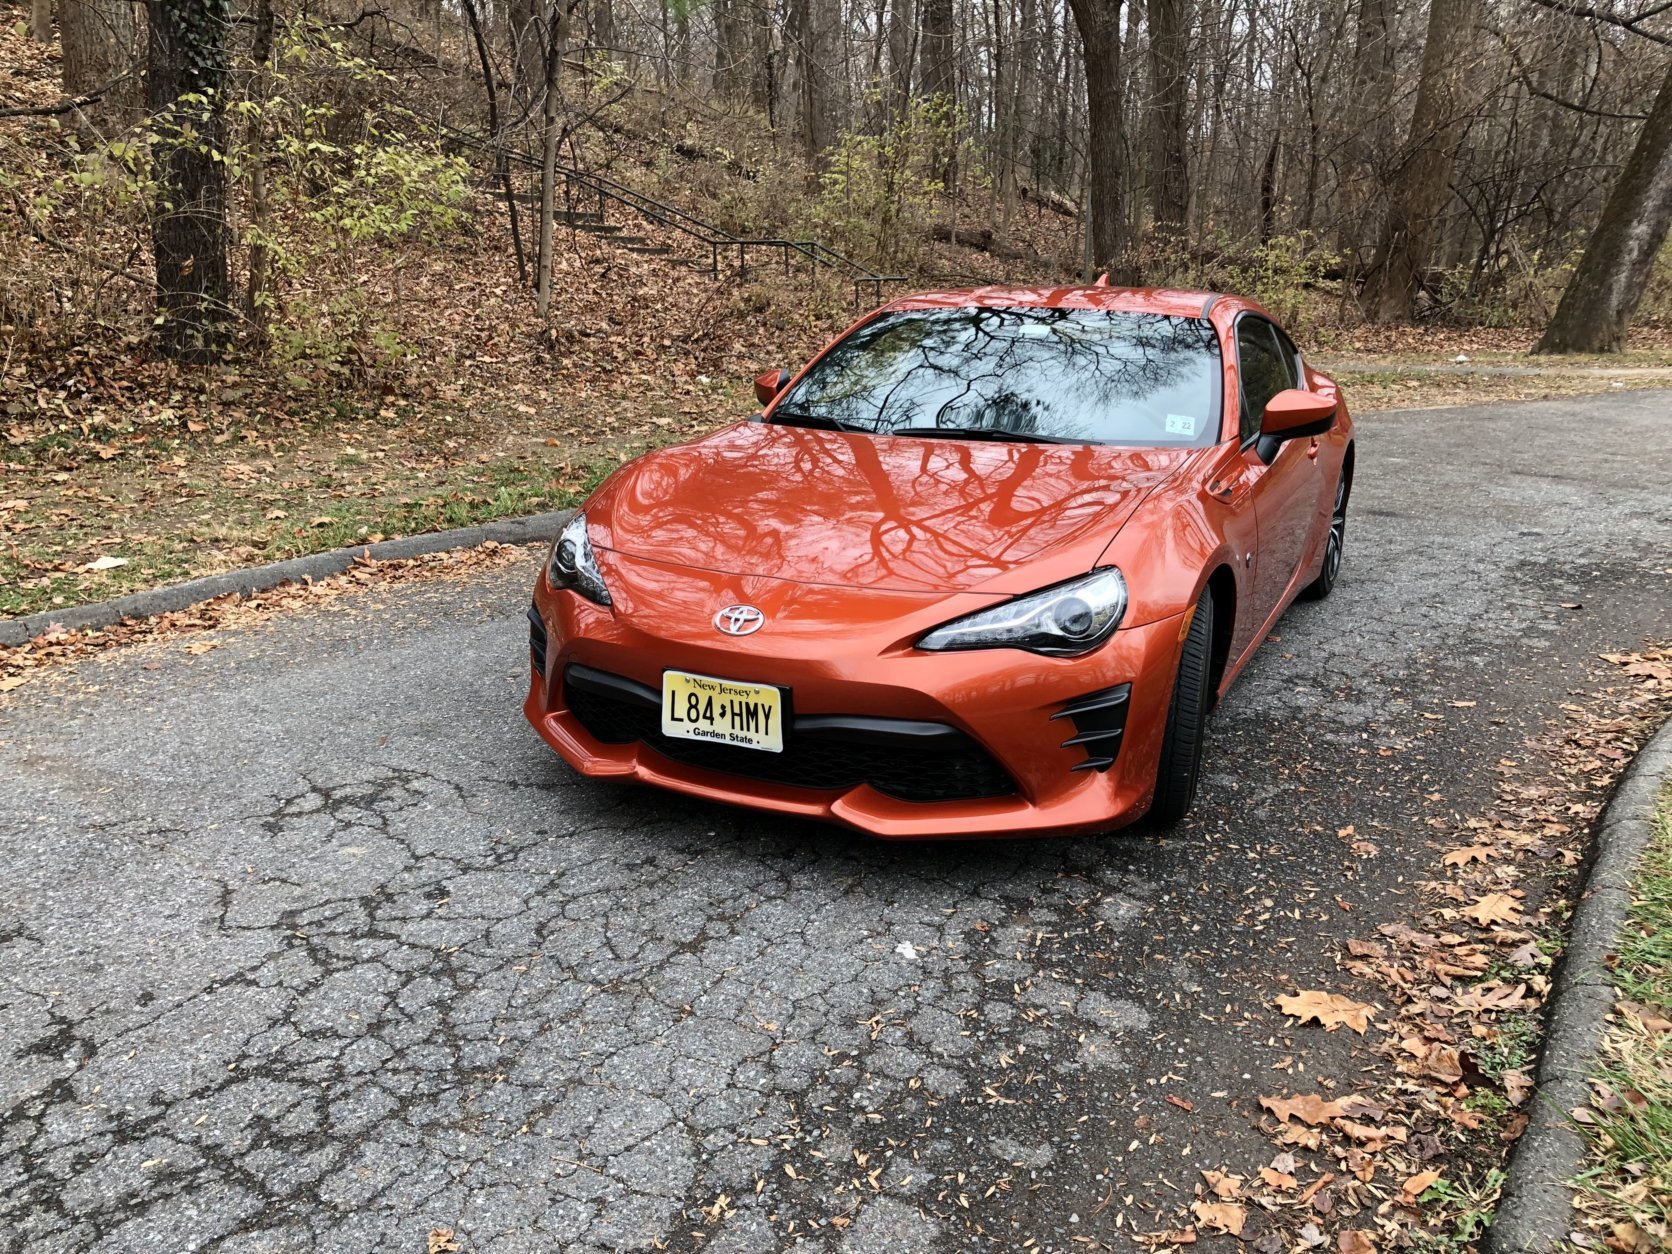 The Toyota 86 excels when it comes to the corners, and if you fancy drifting, the rear-wheel drive coupe will let its tail hangout when you push it. The car is very easy to steer and it goes where you point it. (WTOP/Mike Parris)